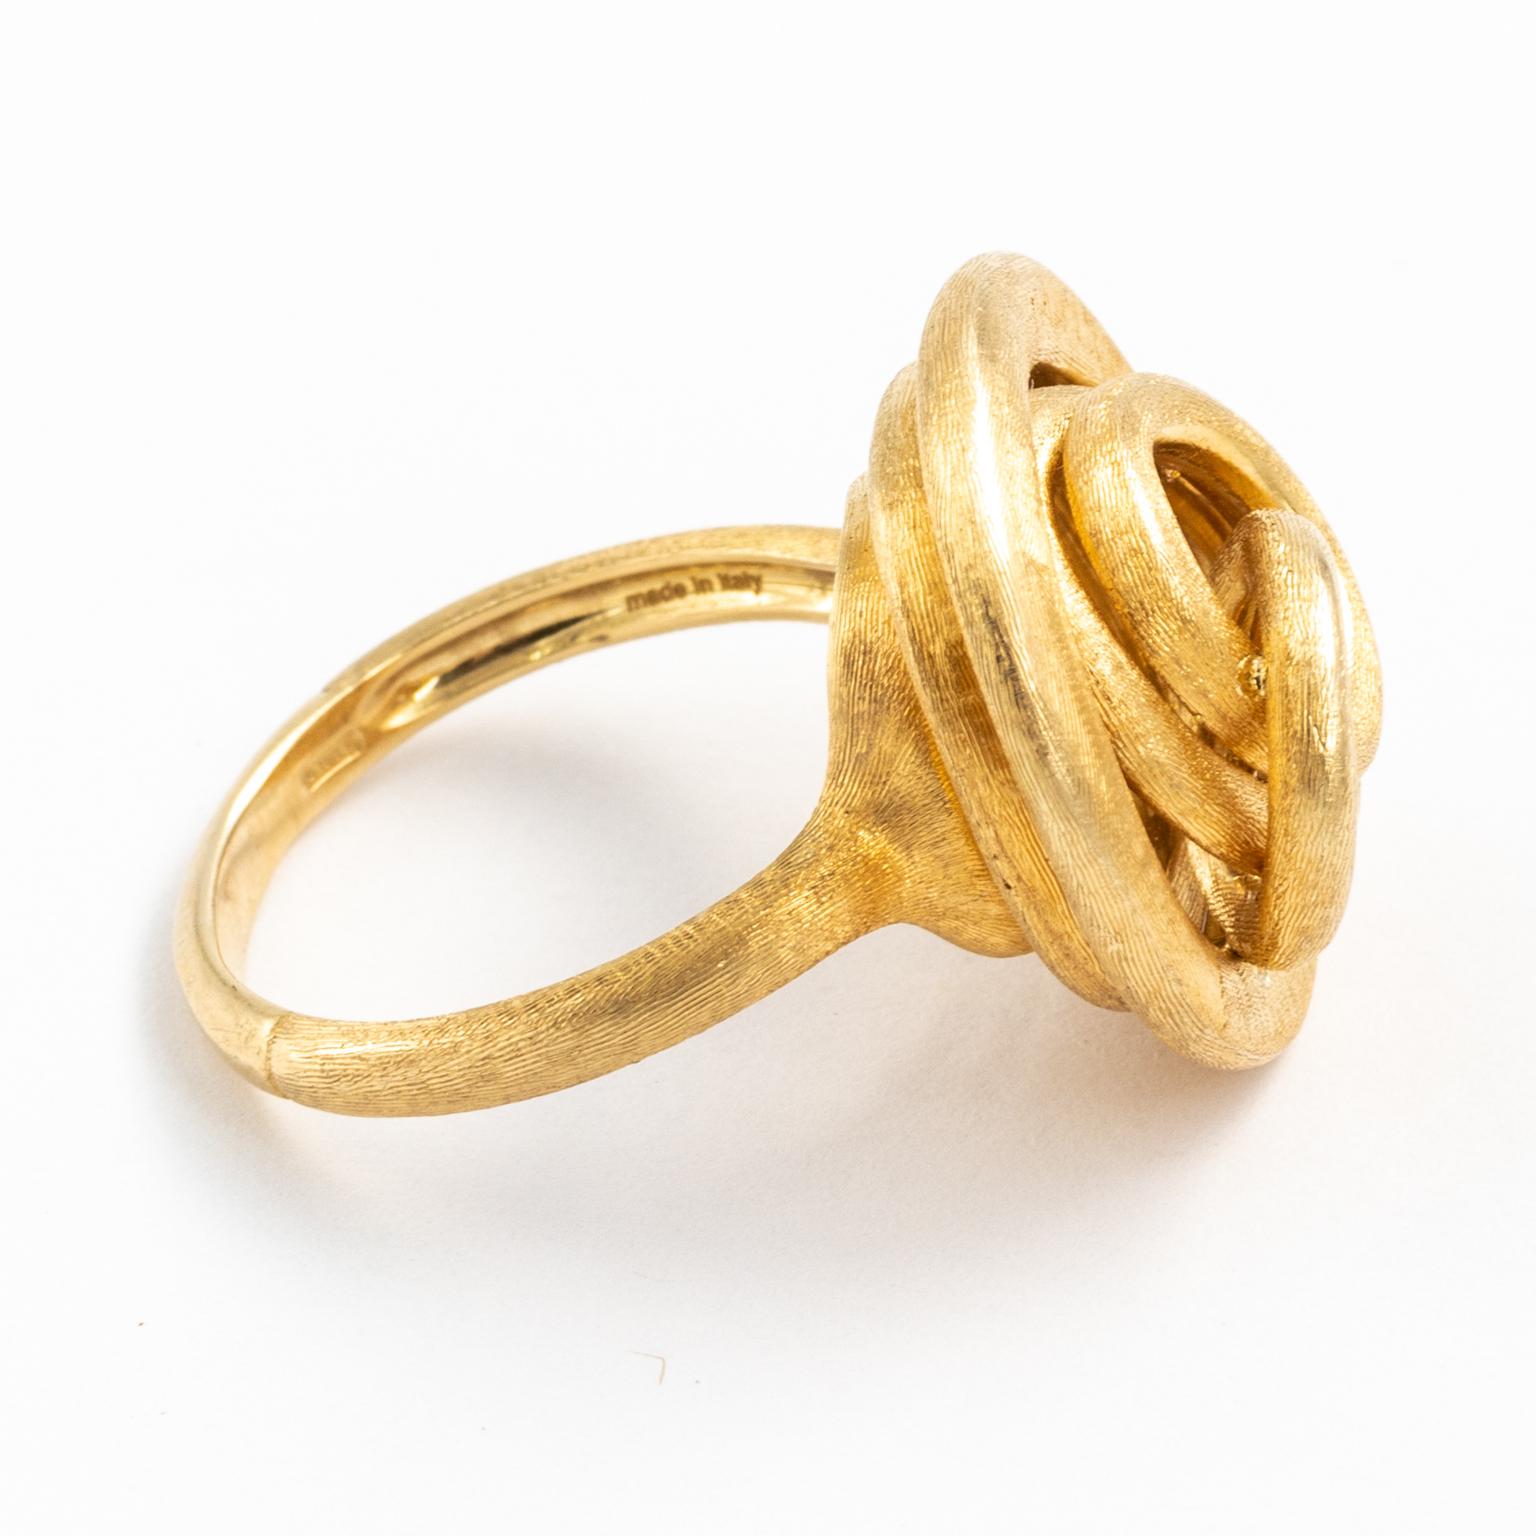 With golden grace, Marco Bicego presents this lovely ring in the Jaipur Link collection. Set in lush 18kt yellow gold, circles of various sizes are stacked and interlinked to form the contemporary design of this gorgeous piece. The silky effect of